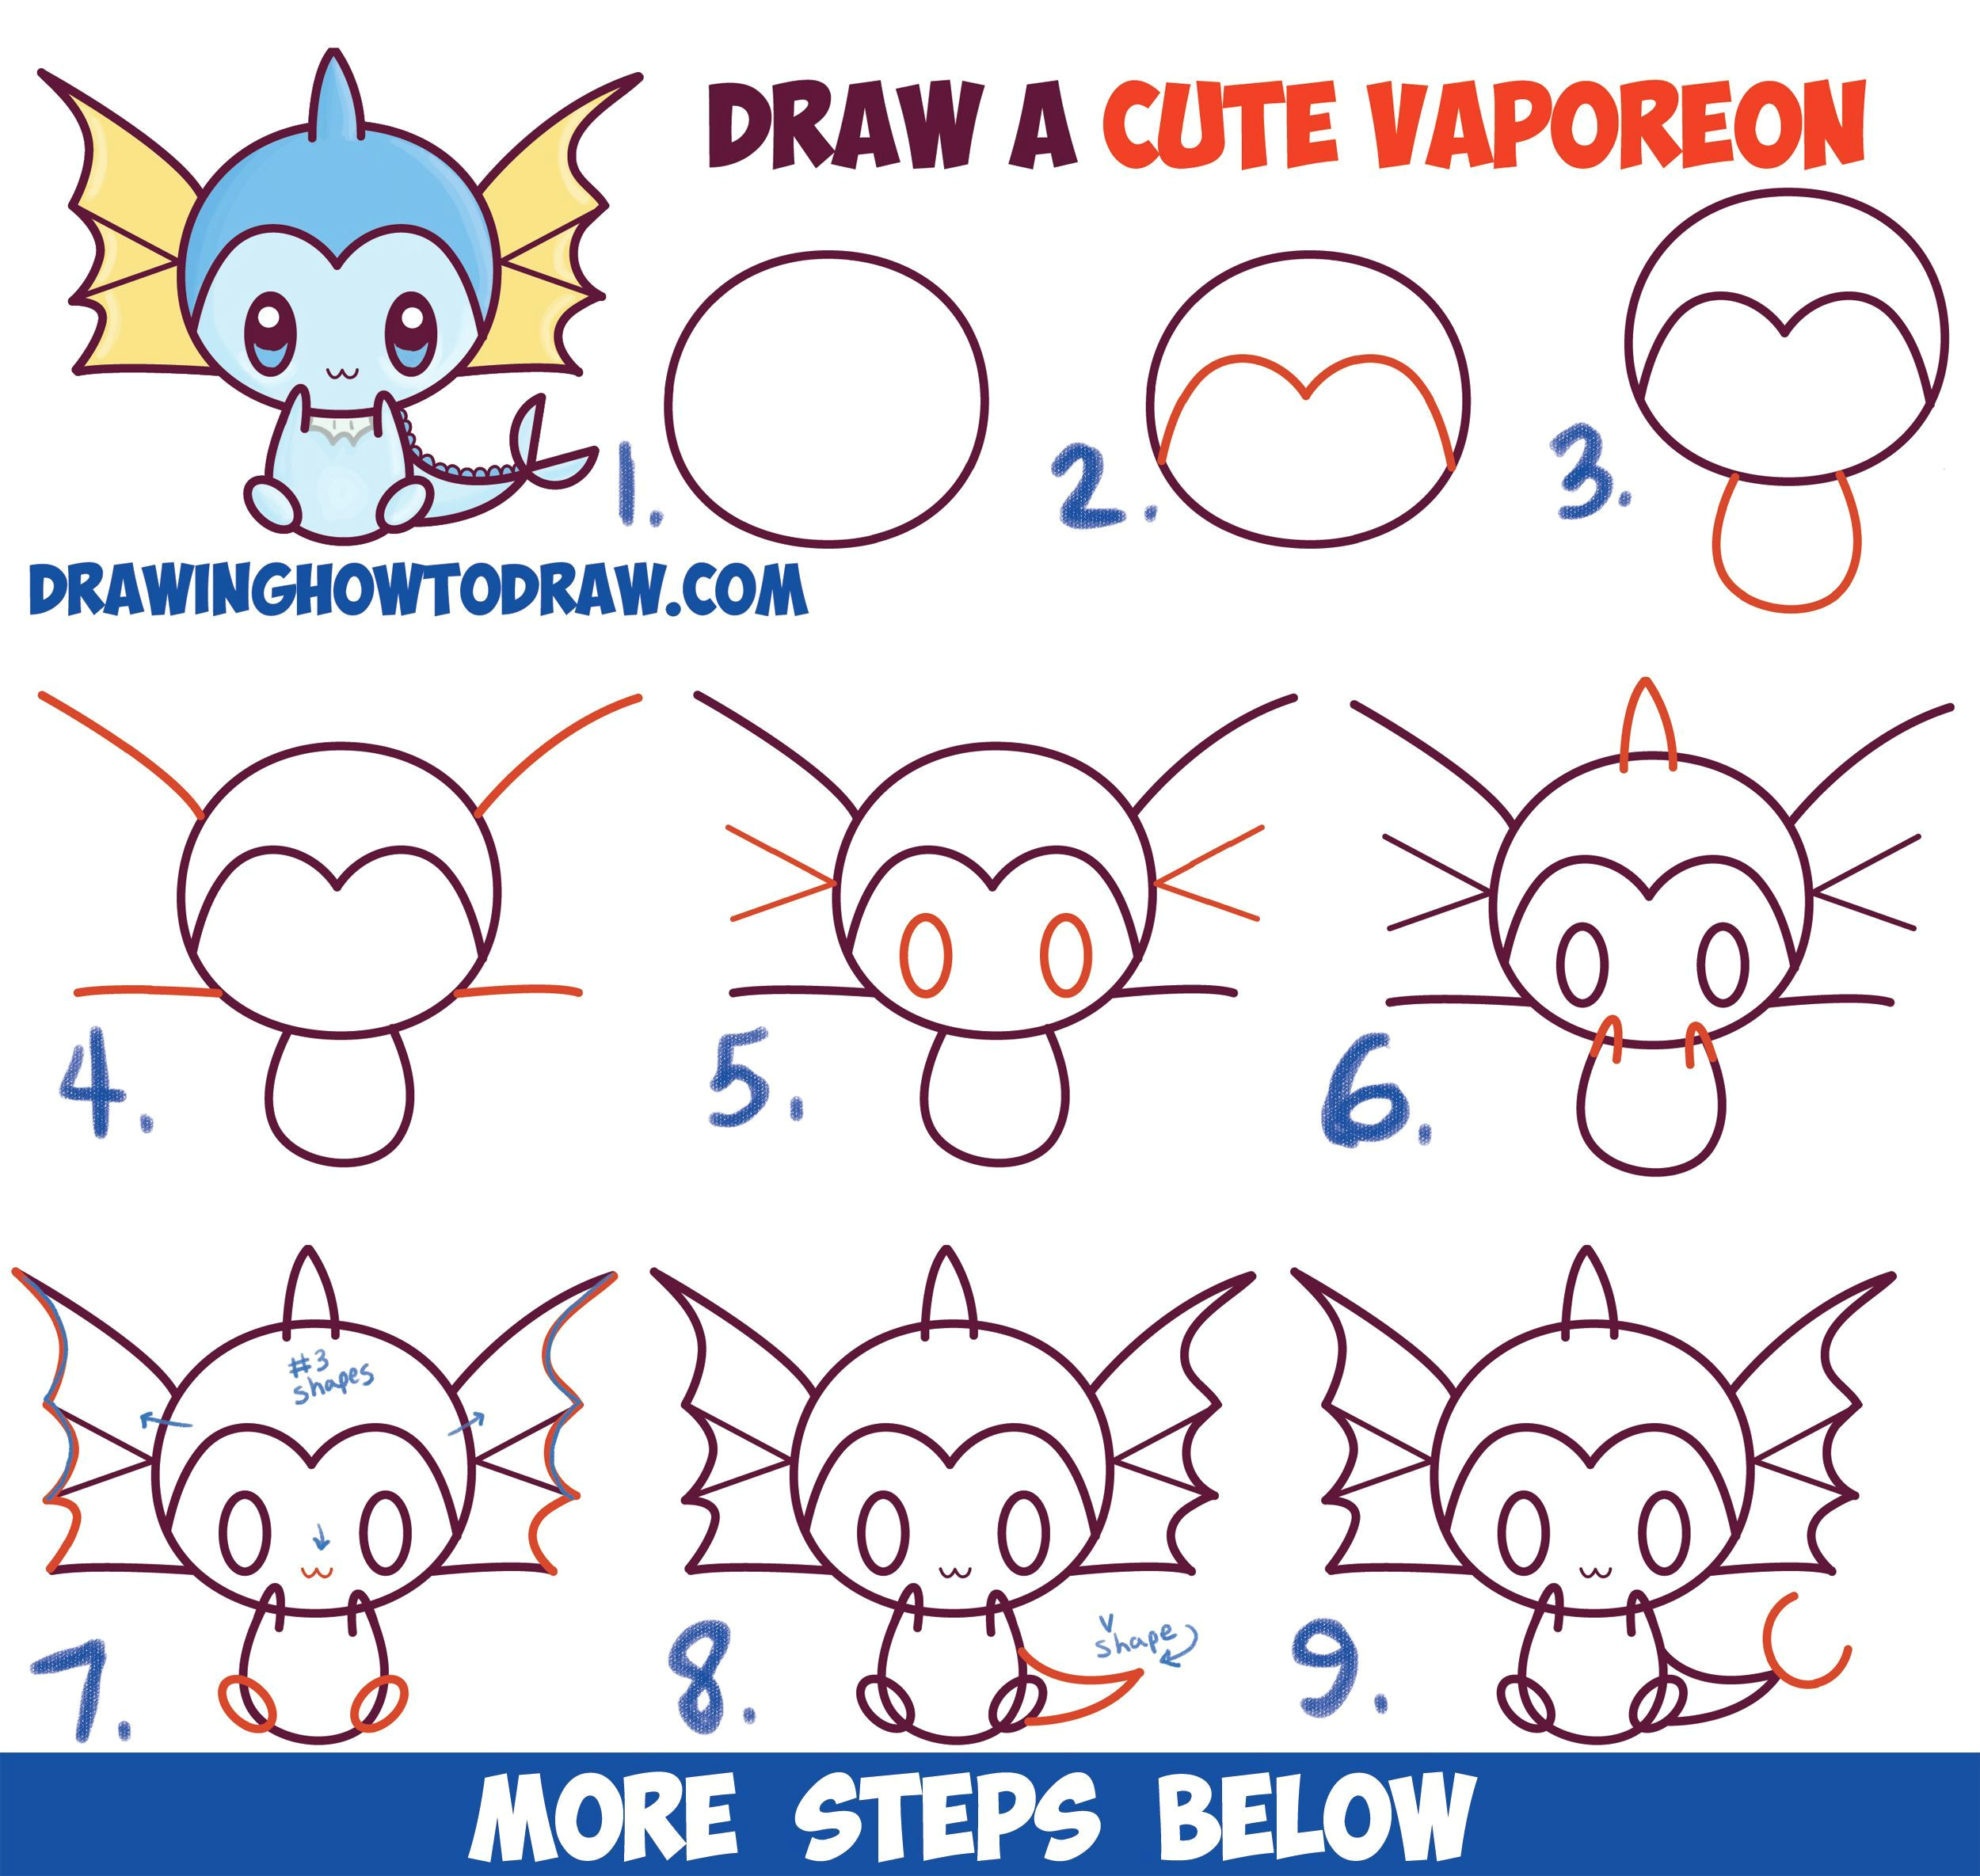 Drawings Easy Pikachu How to Draw Cute Kawaii Chibi Vaporeon From Pokemon Easy Step by